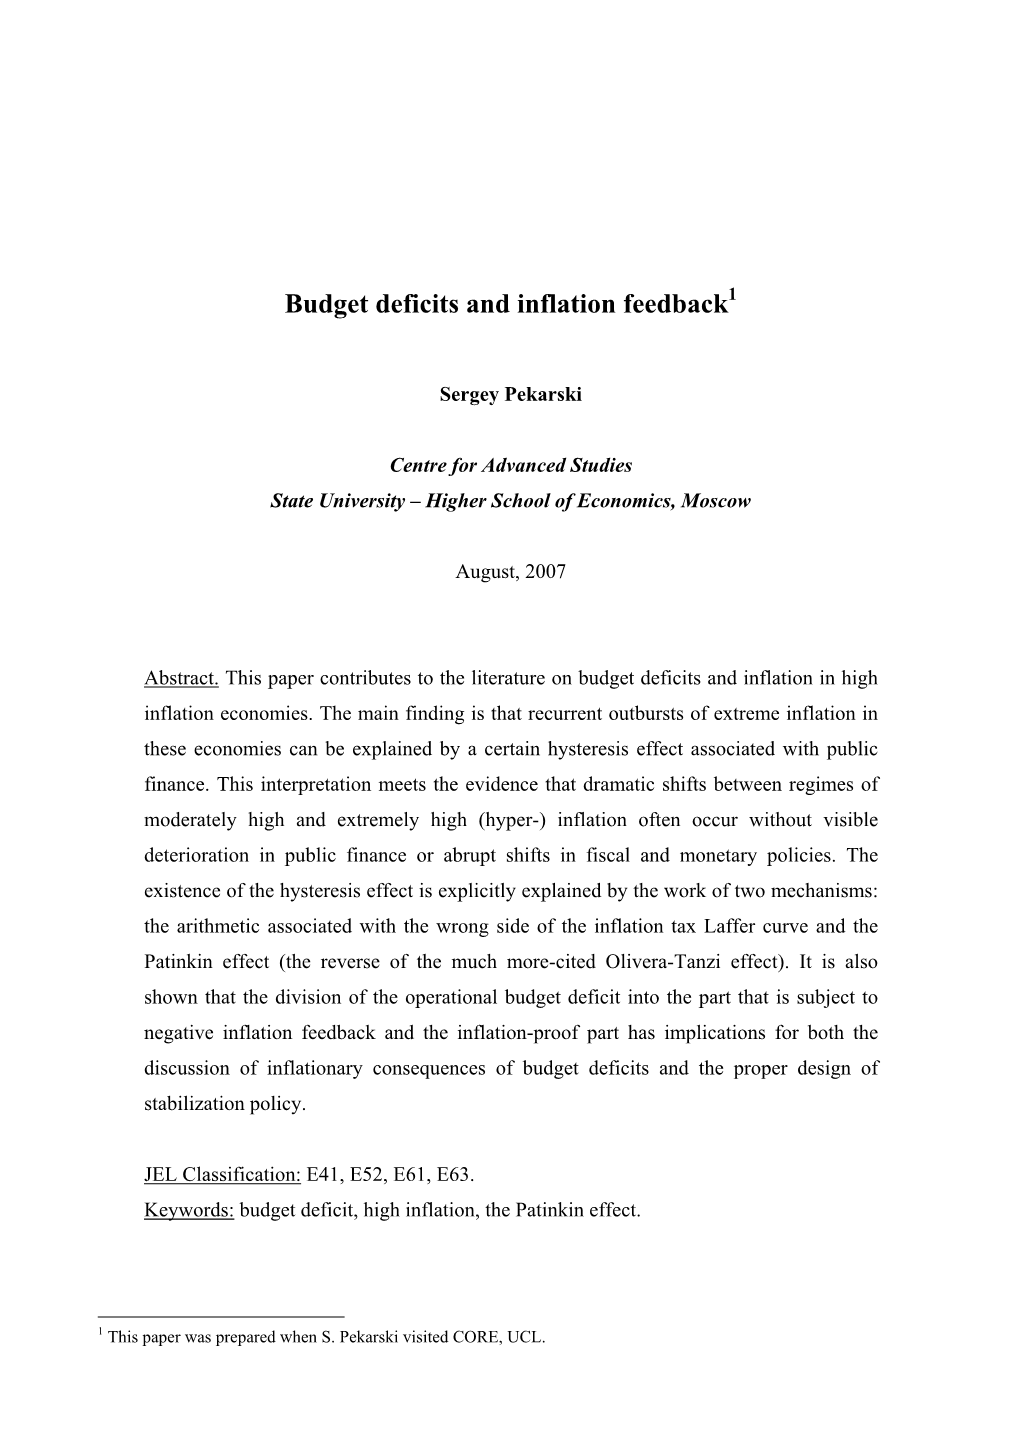 Budget Deficits and Inflation Feedback1